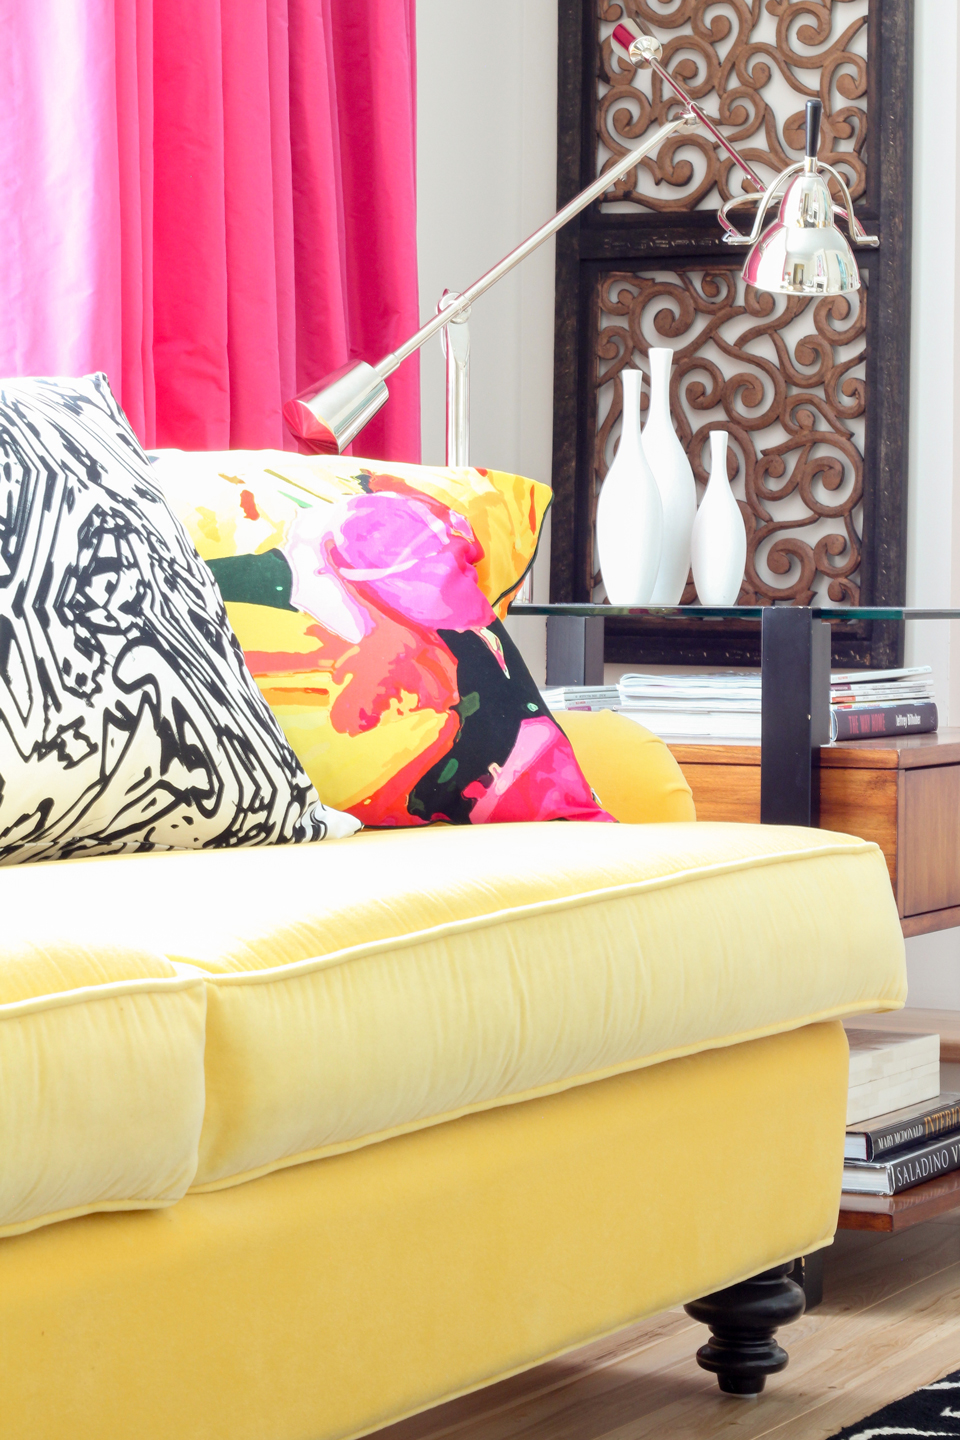 A close-up of a yellow couch, pink curtains, & floral pillow